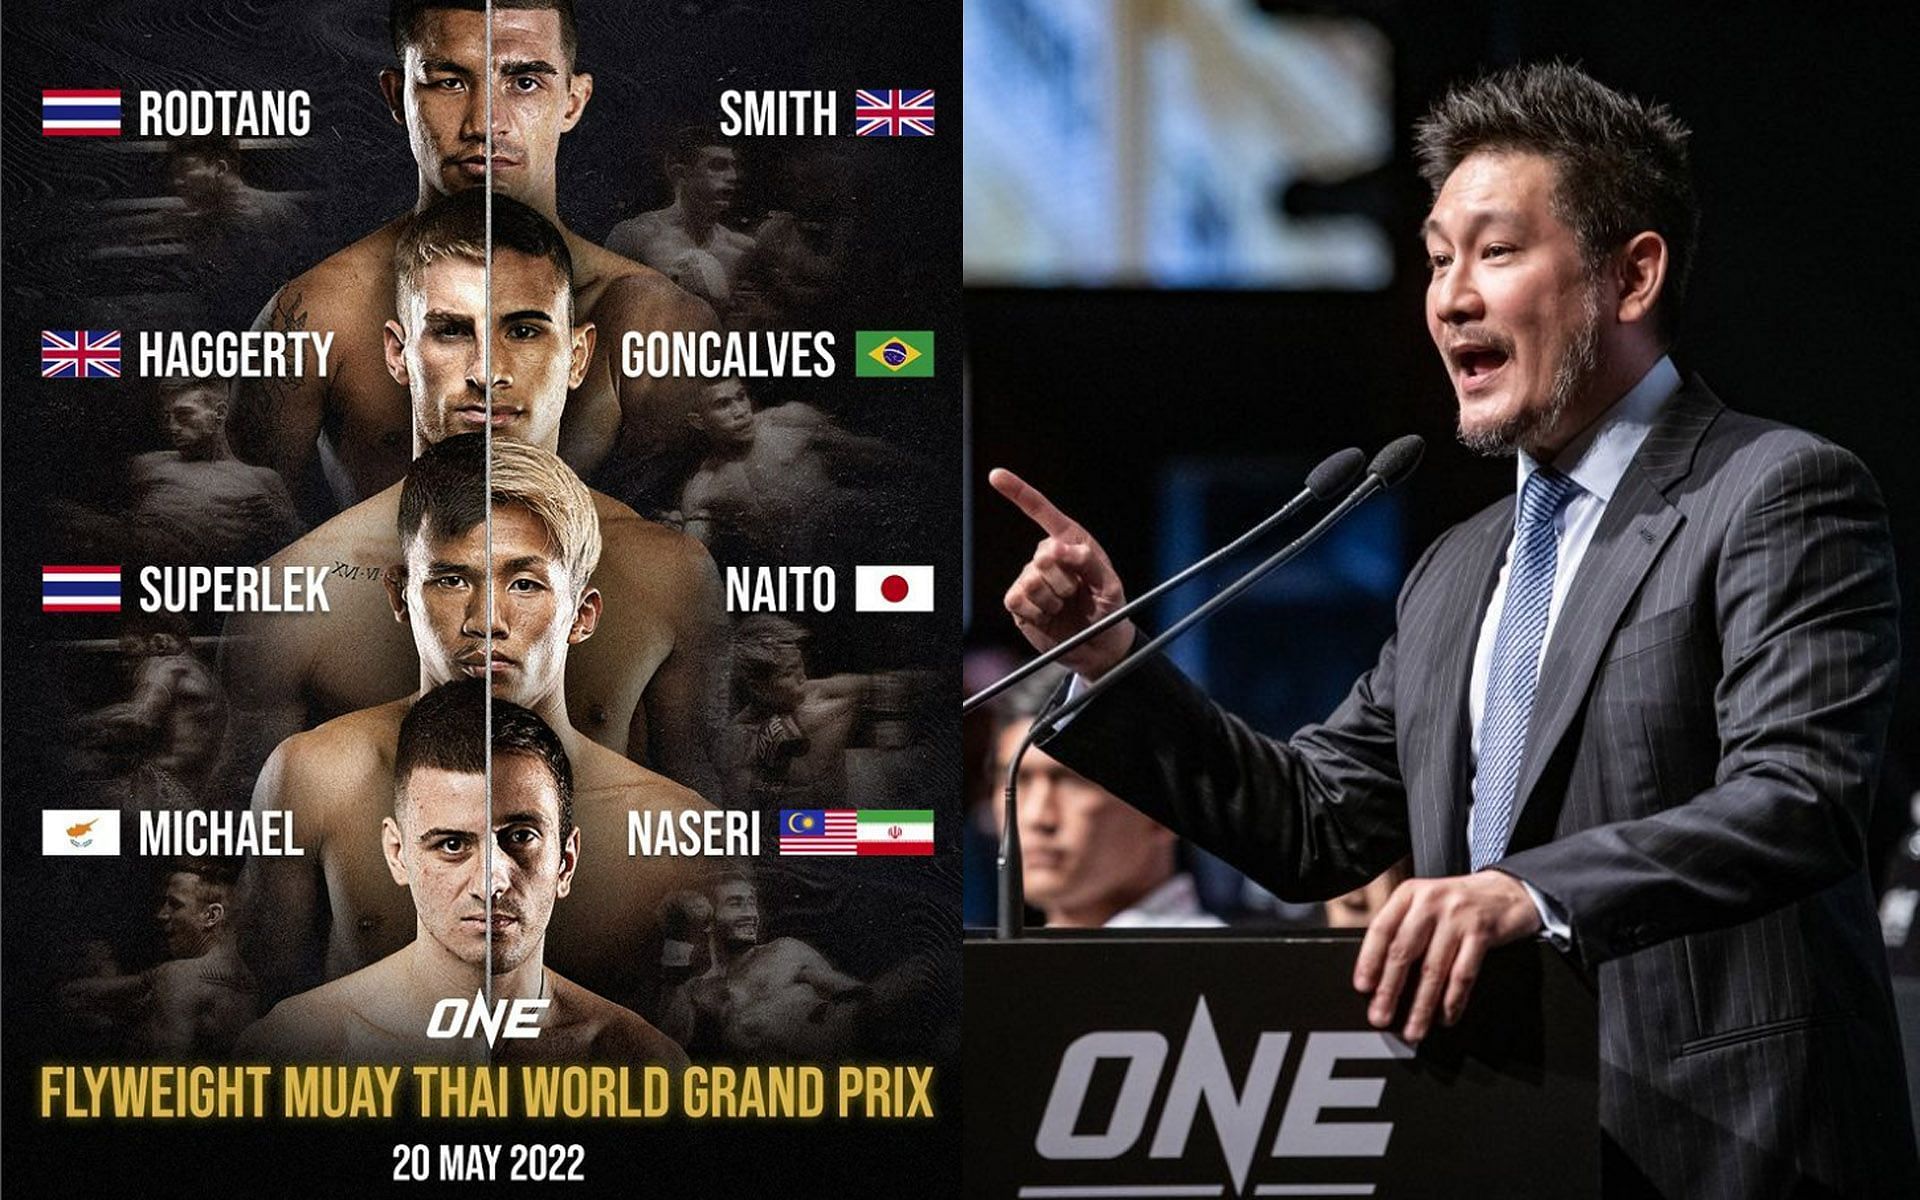 Chatri Sityodtong (right) announced the date and matchups for the ONE Flyweight Muay Thai World Grand Prix. [Photos: ONE Championship]